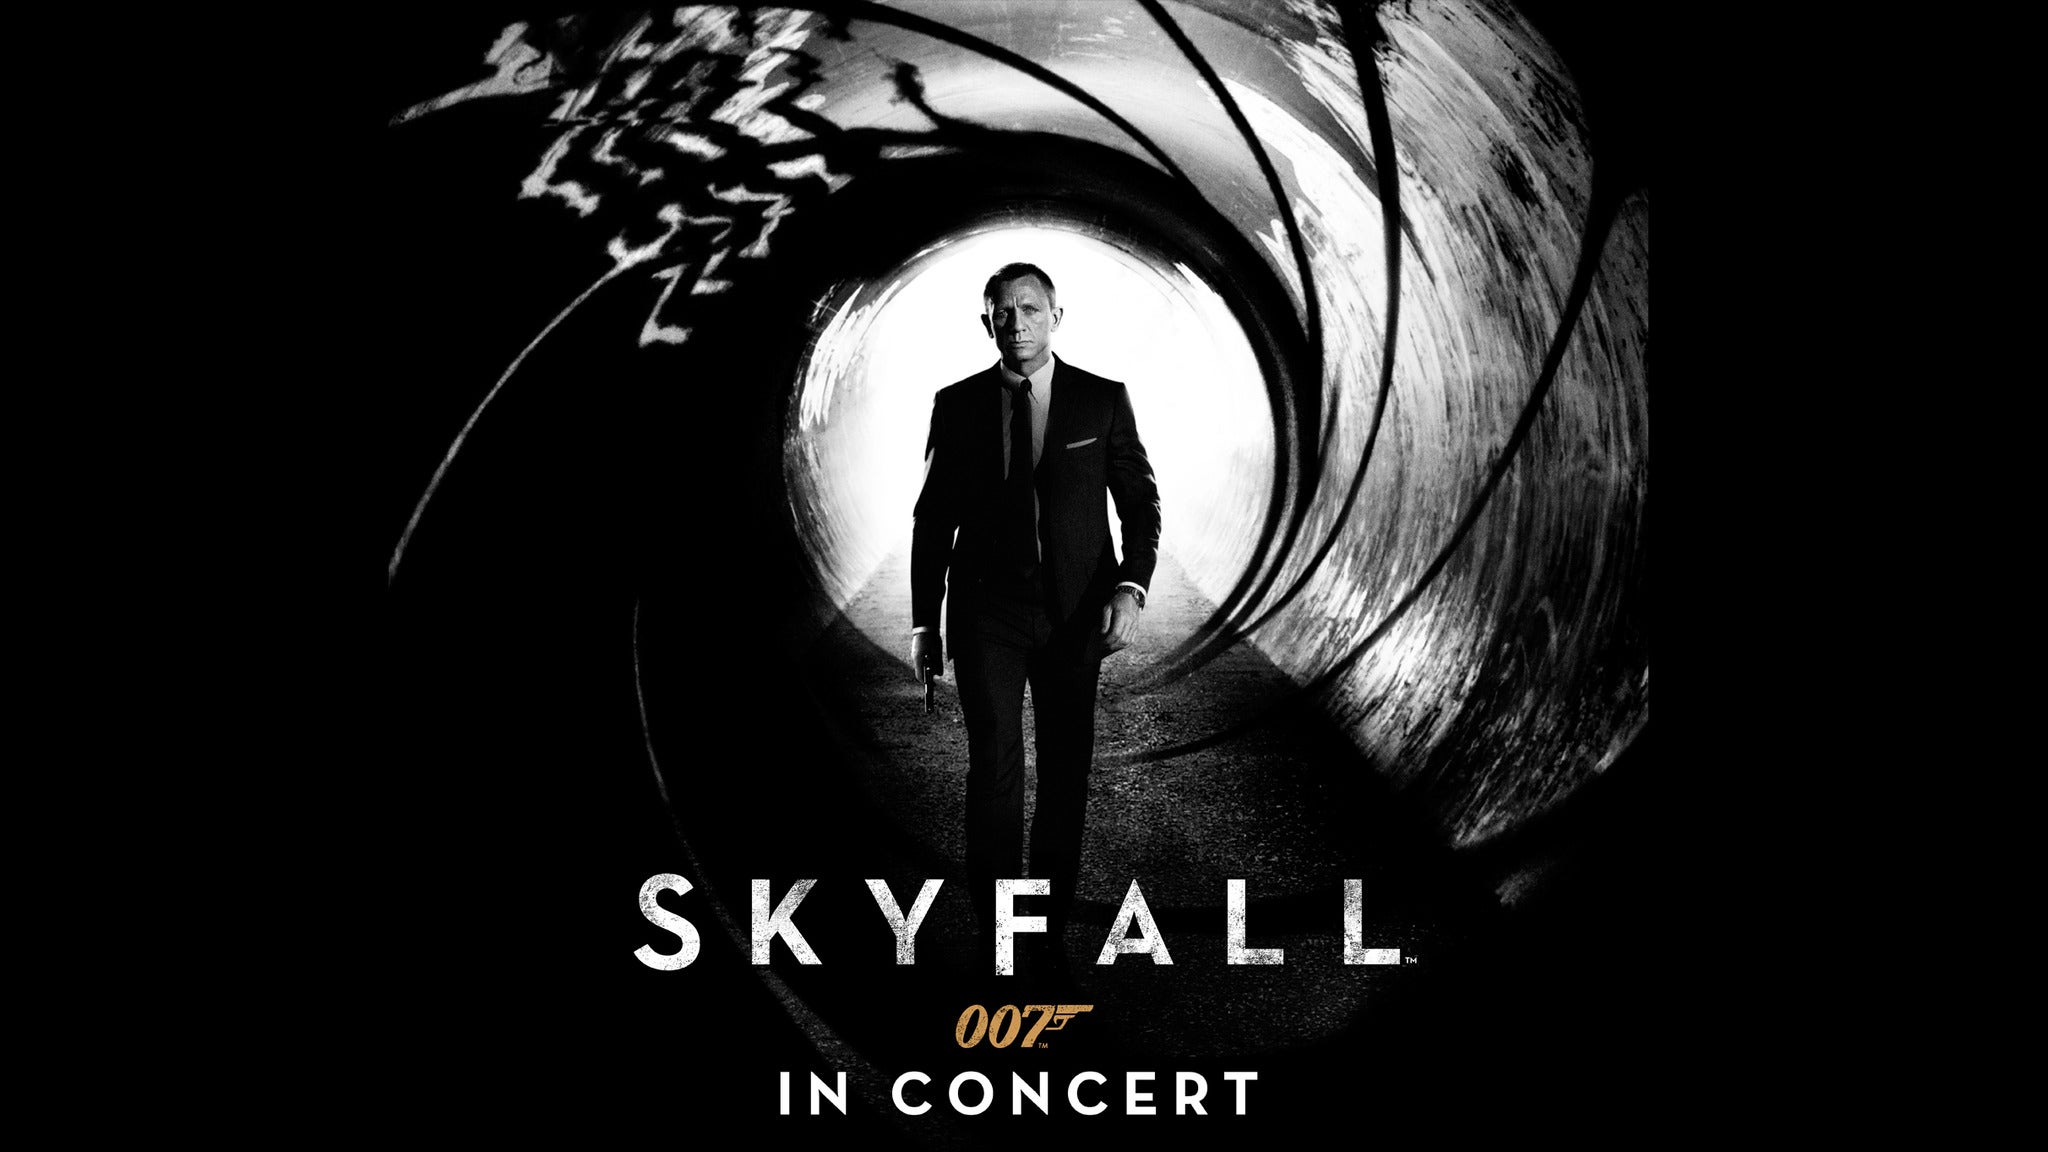 Skyfall in Concert presale password for early tickets in Toronto